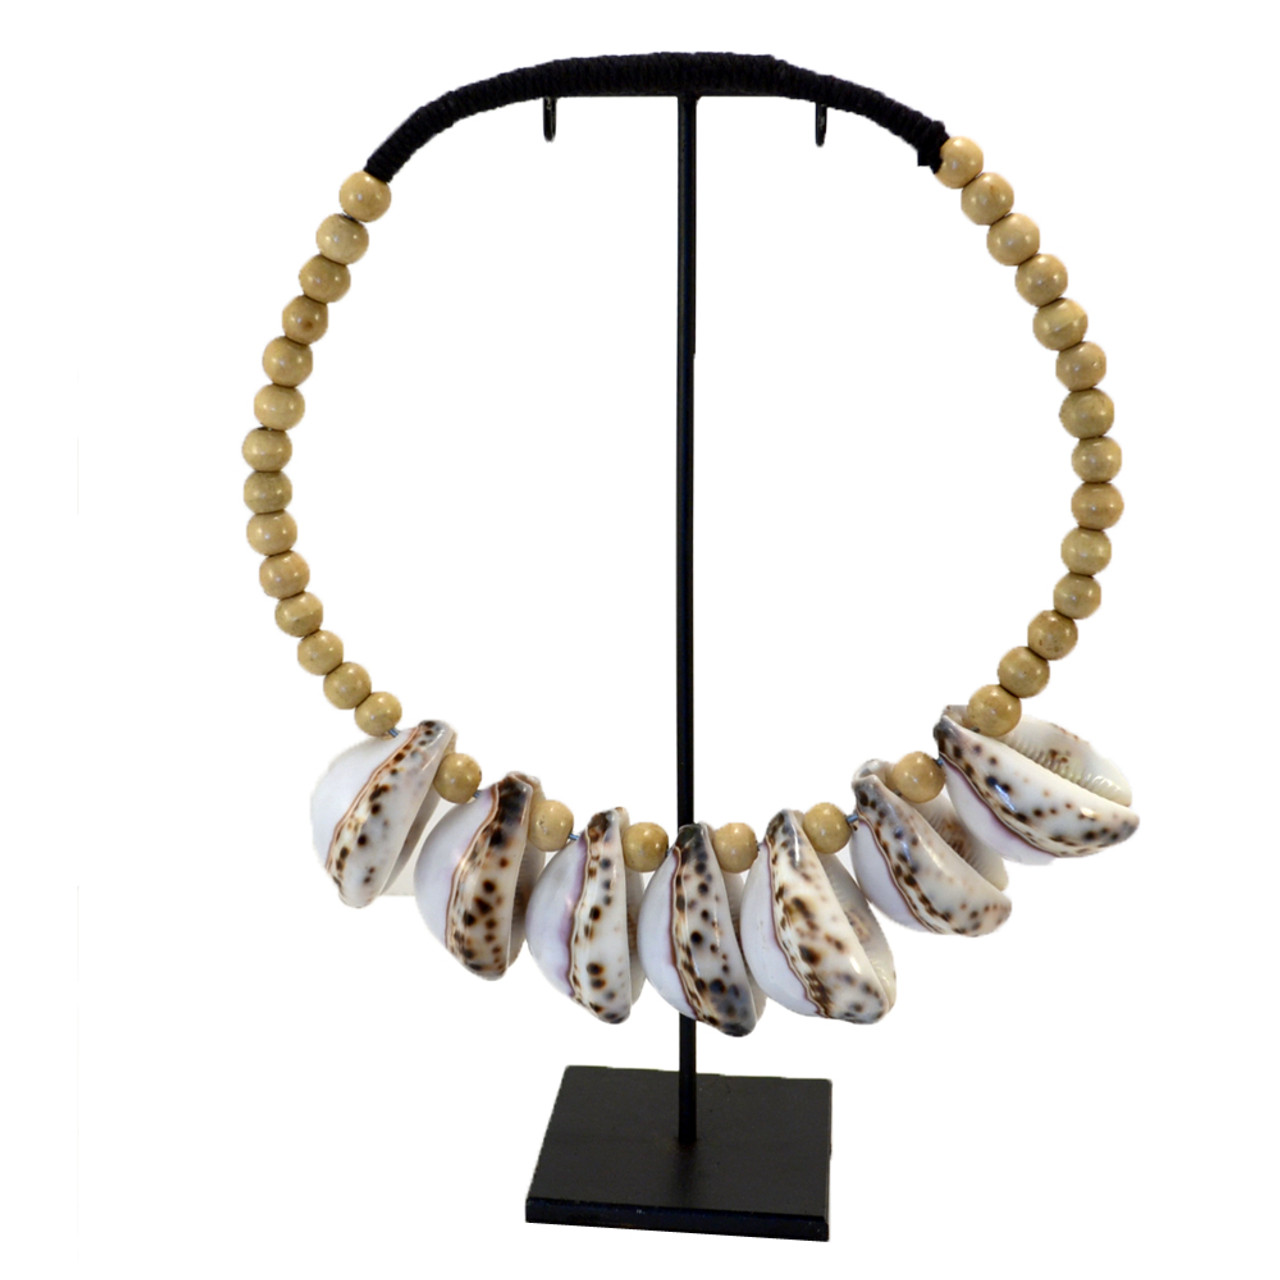 Tiger Shell decorative necklace on metal stand